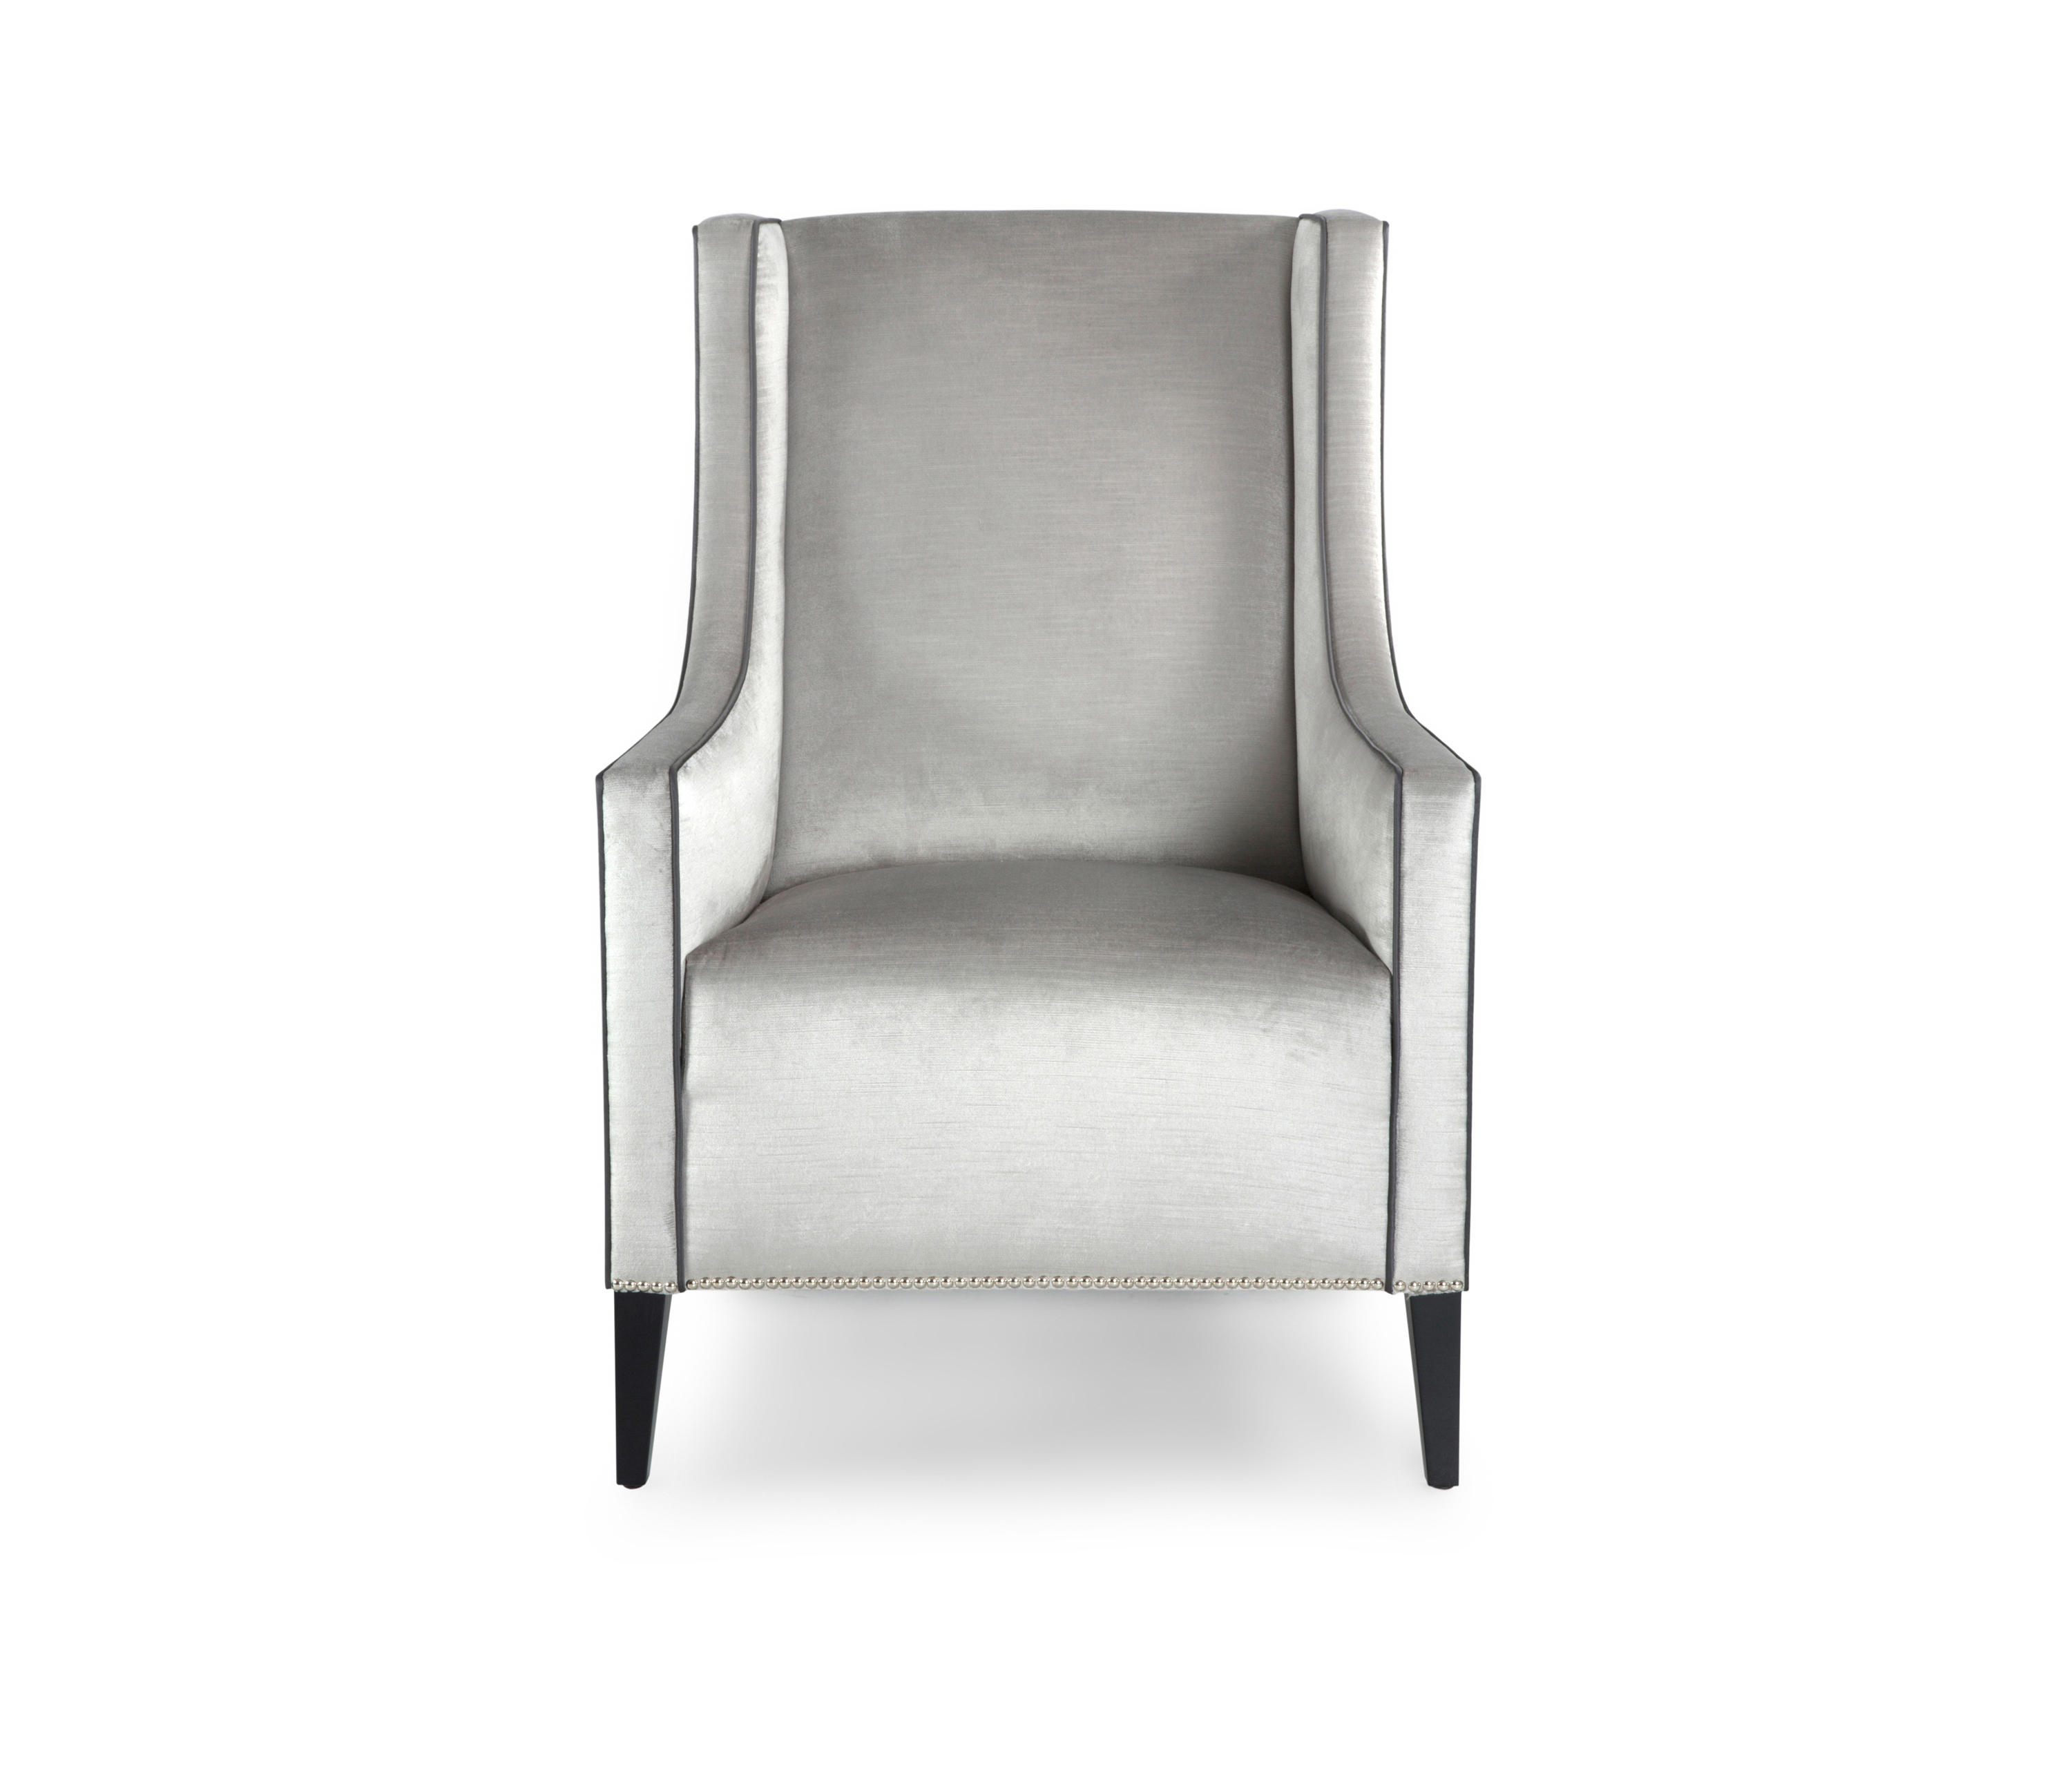 Christo small occasional chair | Architonic